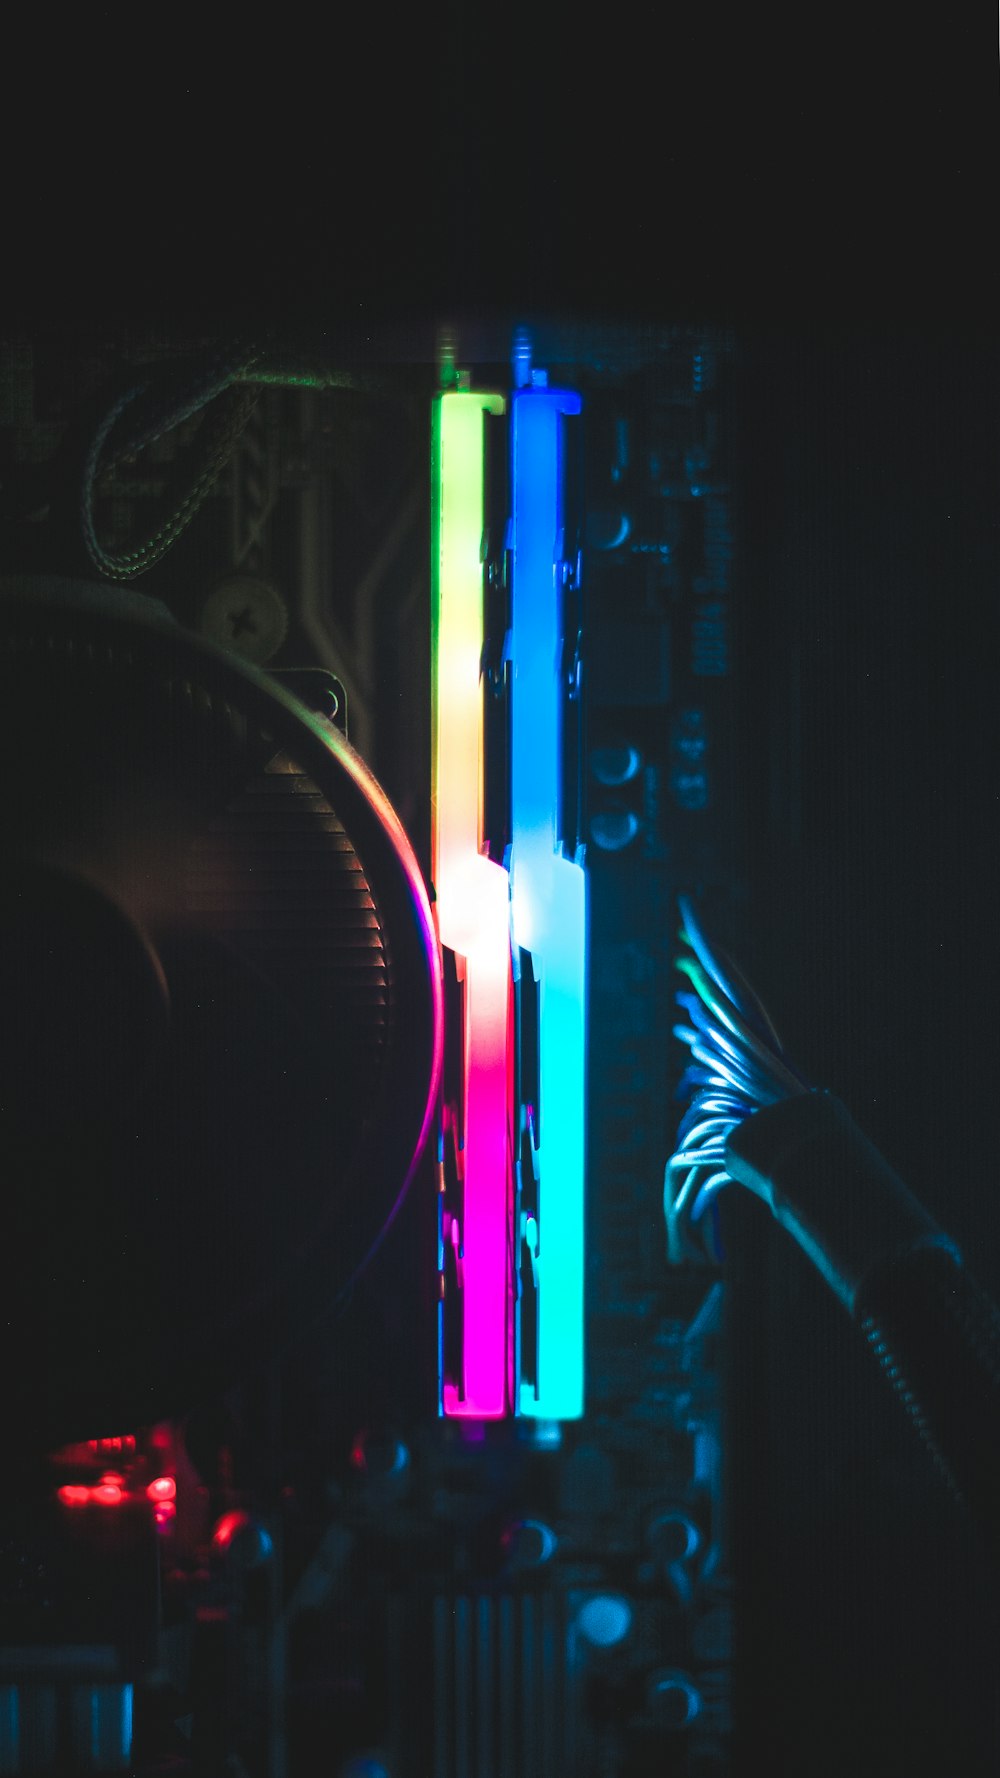 a close up of a computer motherboard with neon lights